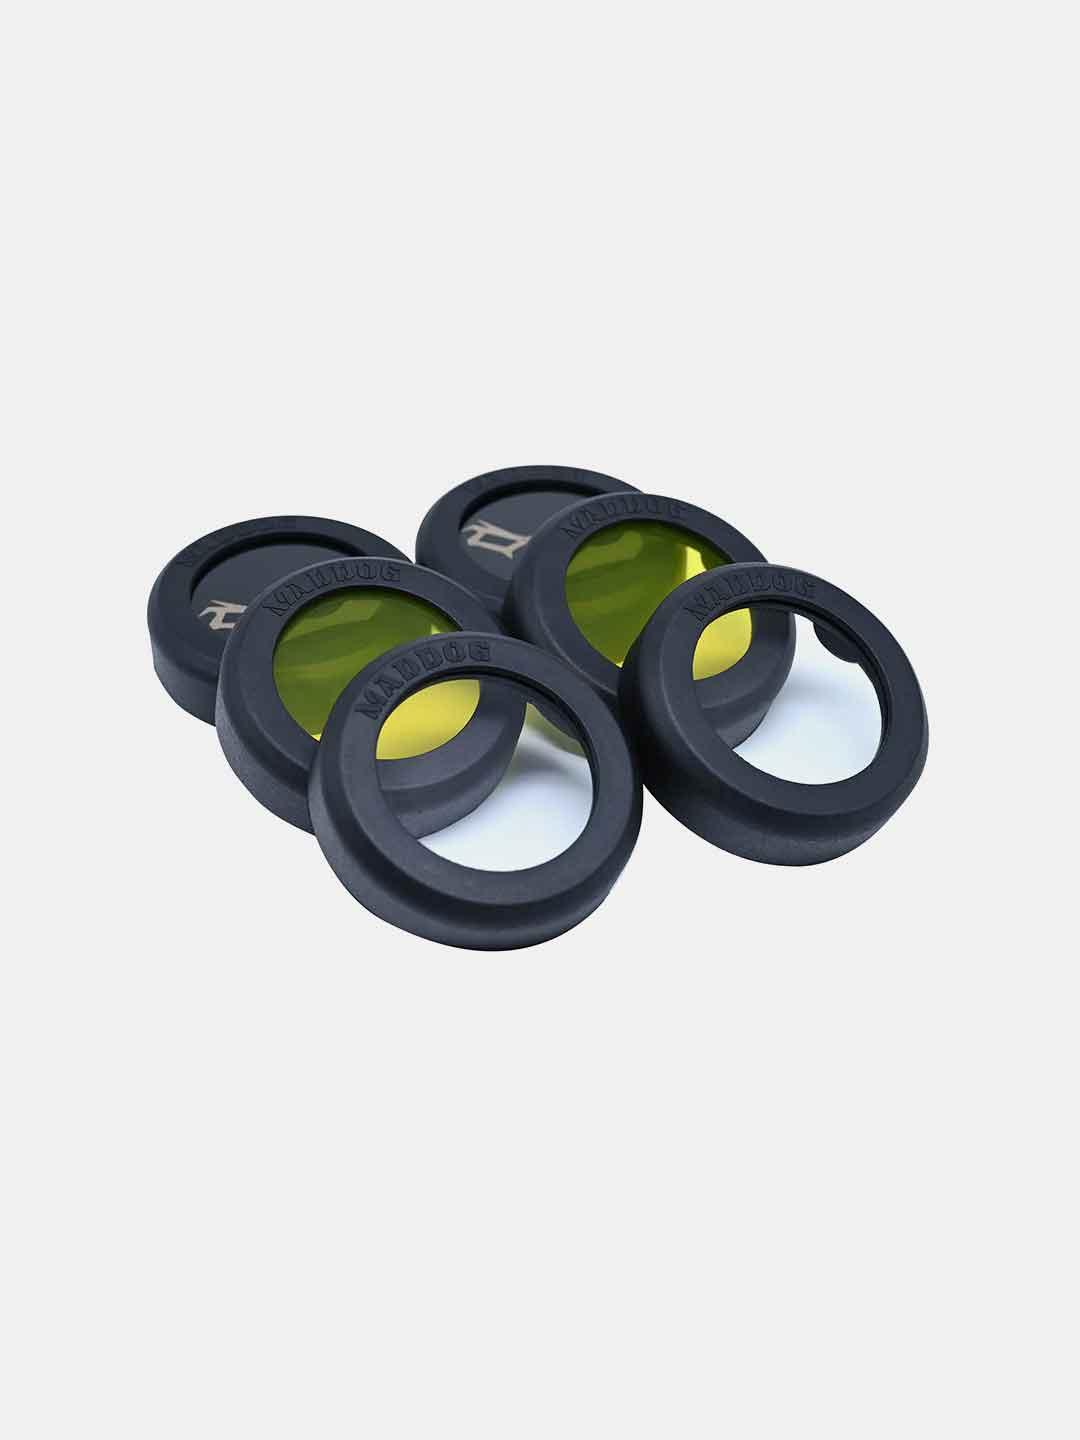 MadDog Scout/Scout-X Auxiliary light filters - Moto Modz